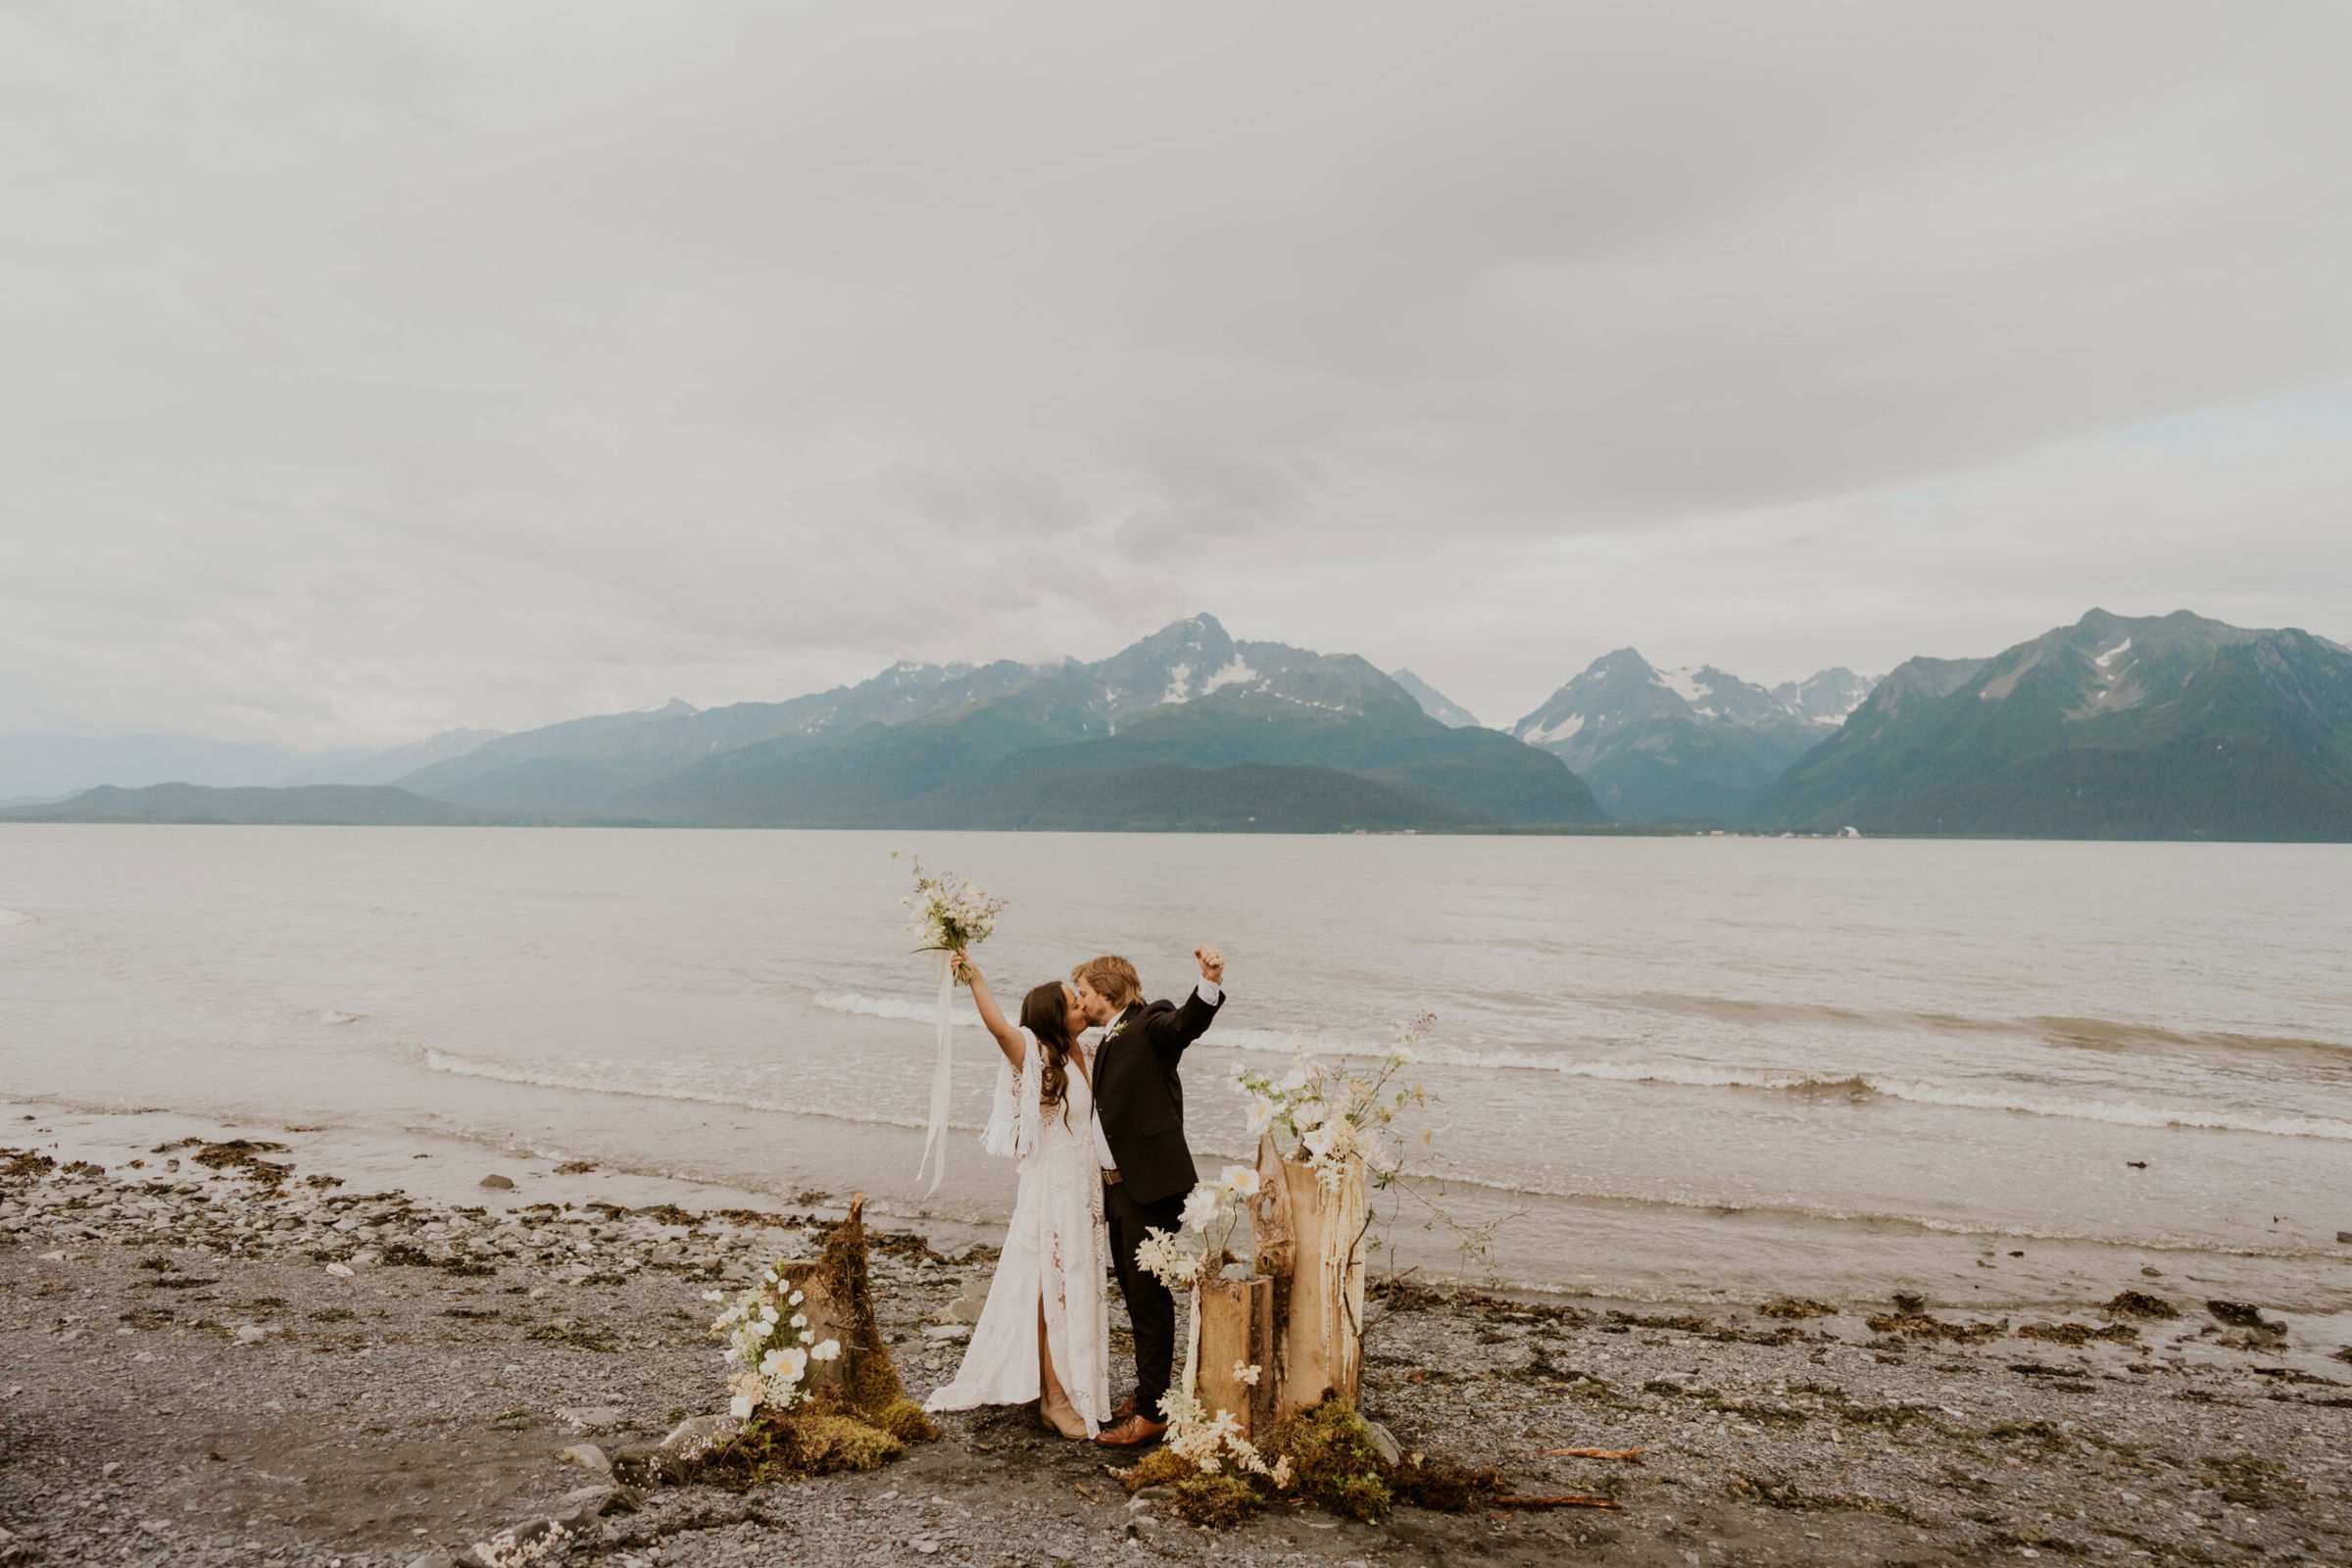 A couple celebrates getting married on public land.